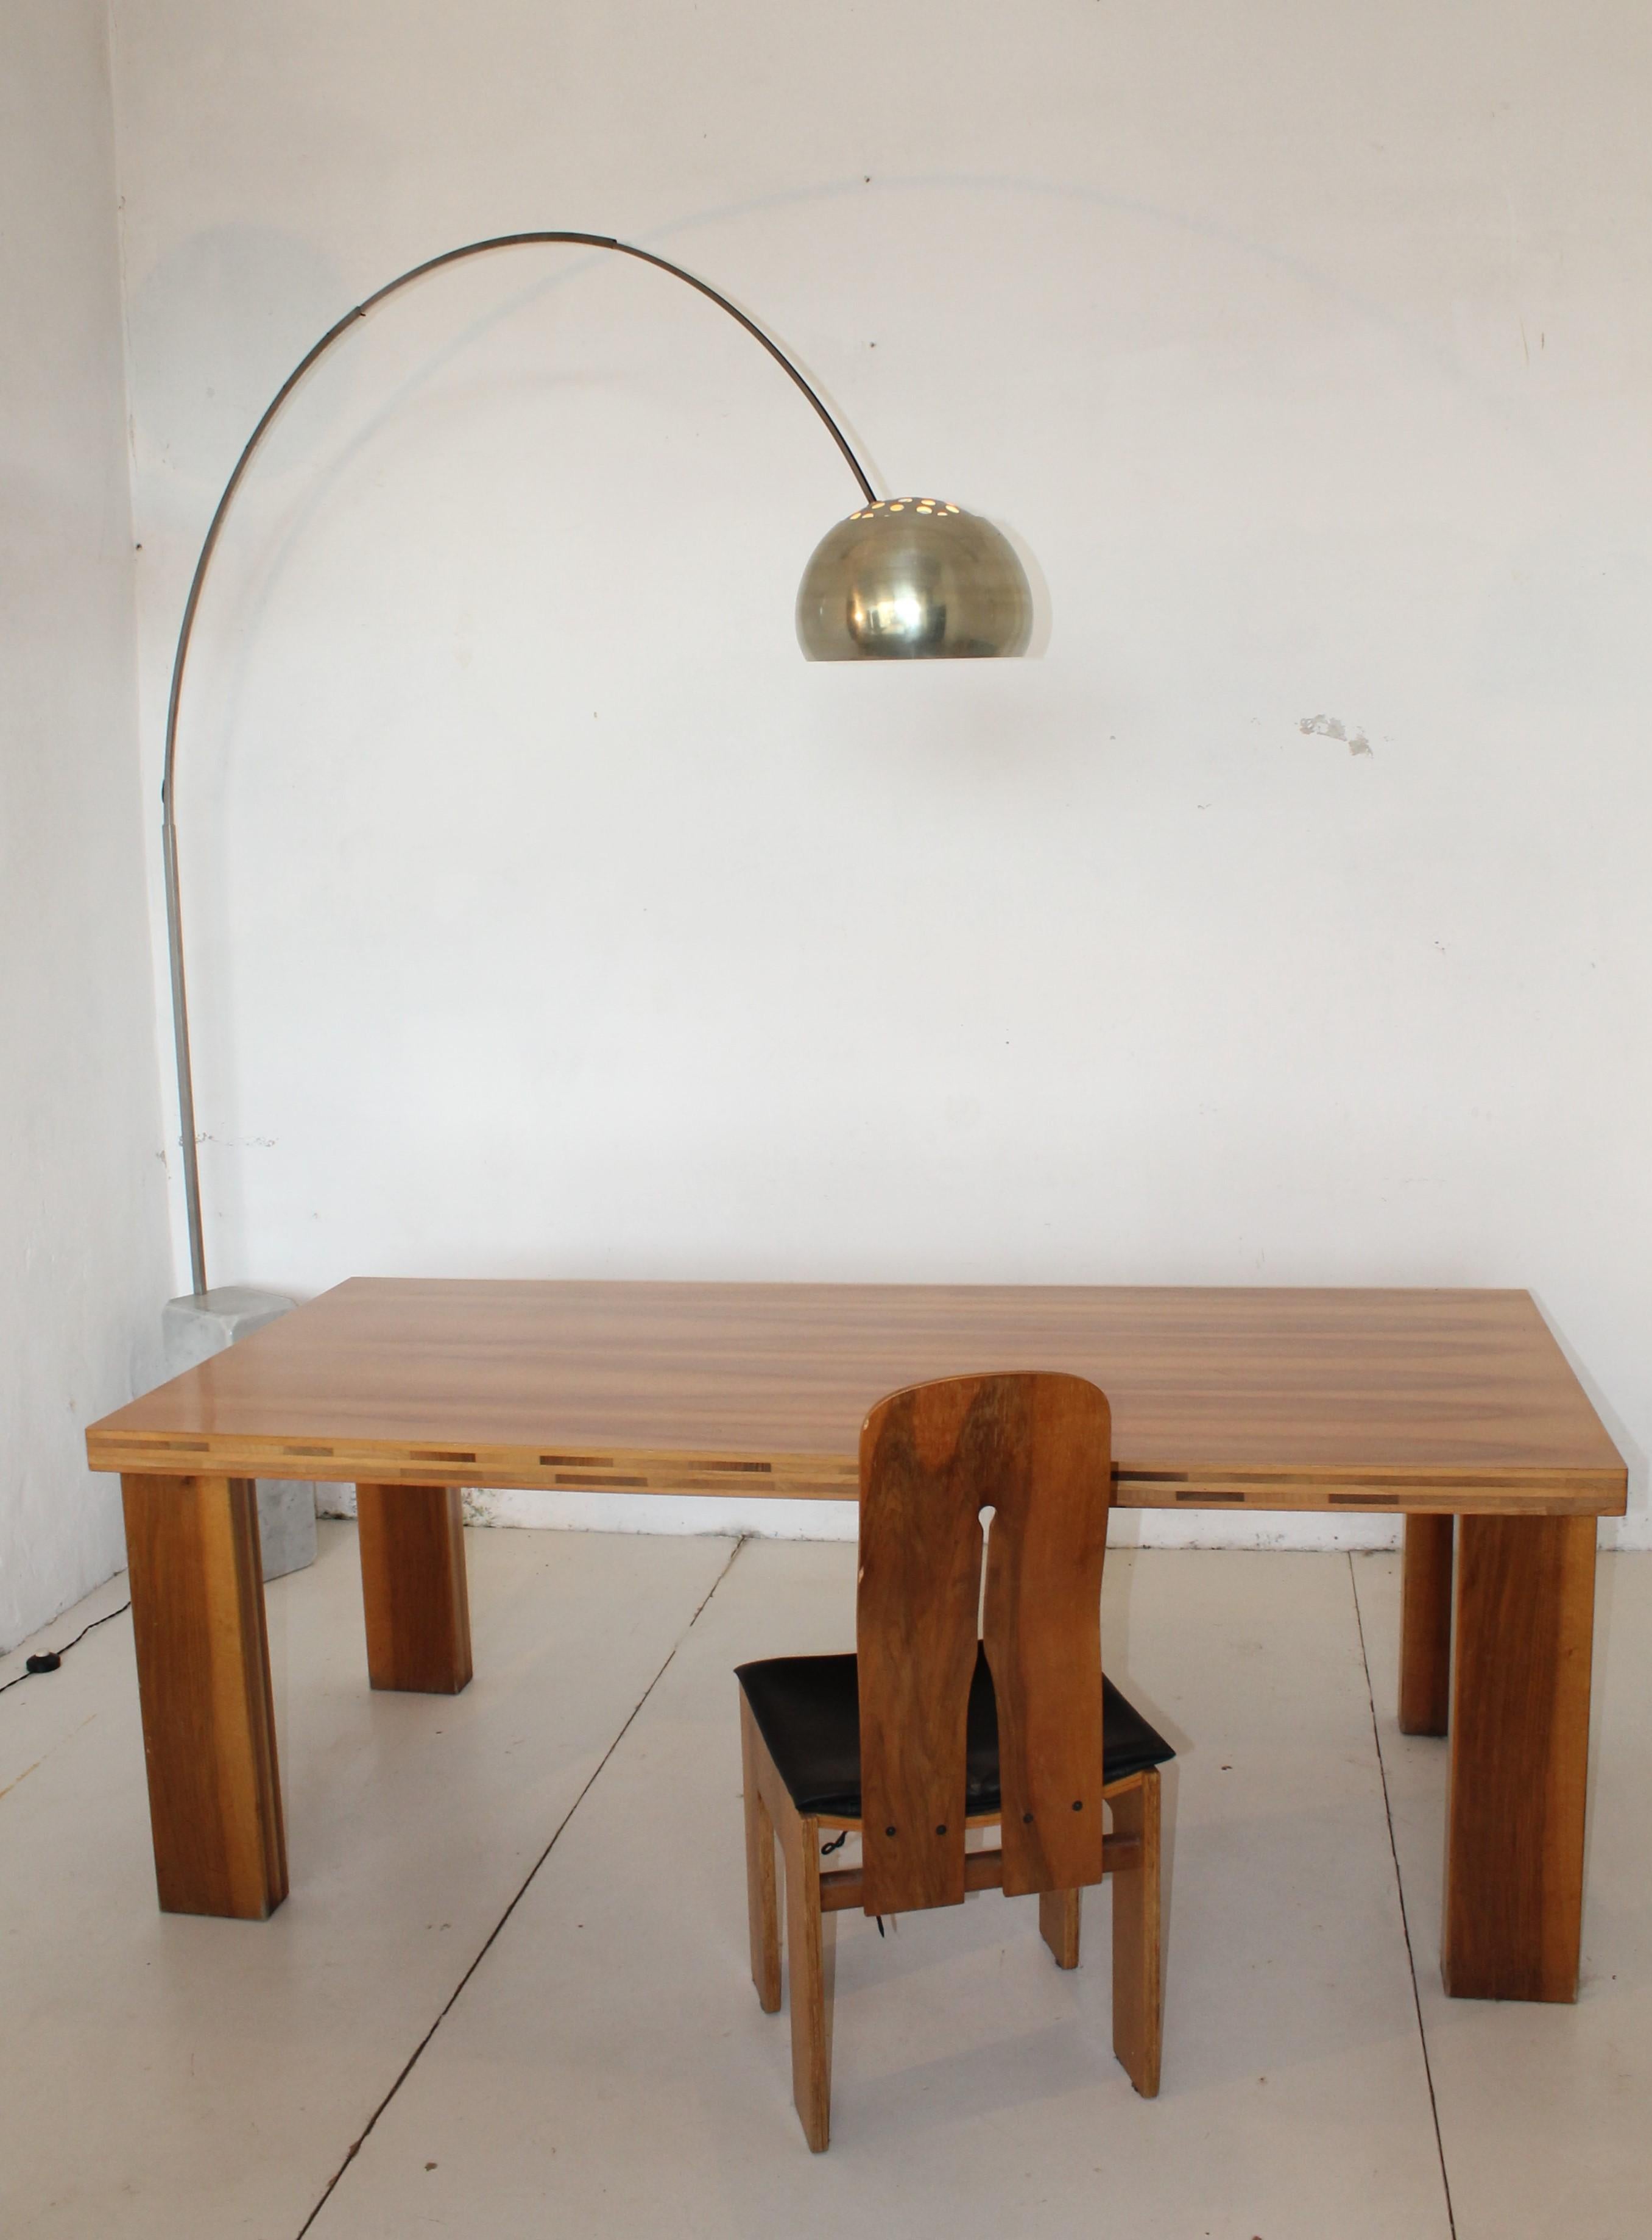 Arco Flos Lamp by Achille and Pier Giacomo Castiglioni, Italy '70s In Good Condition For Sale In Sacile, PN